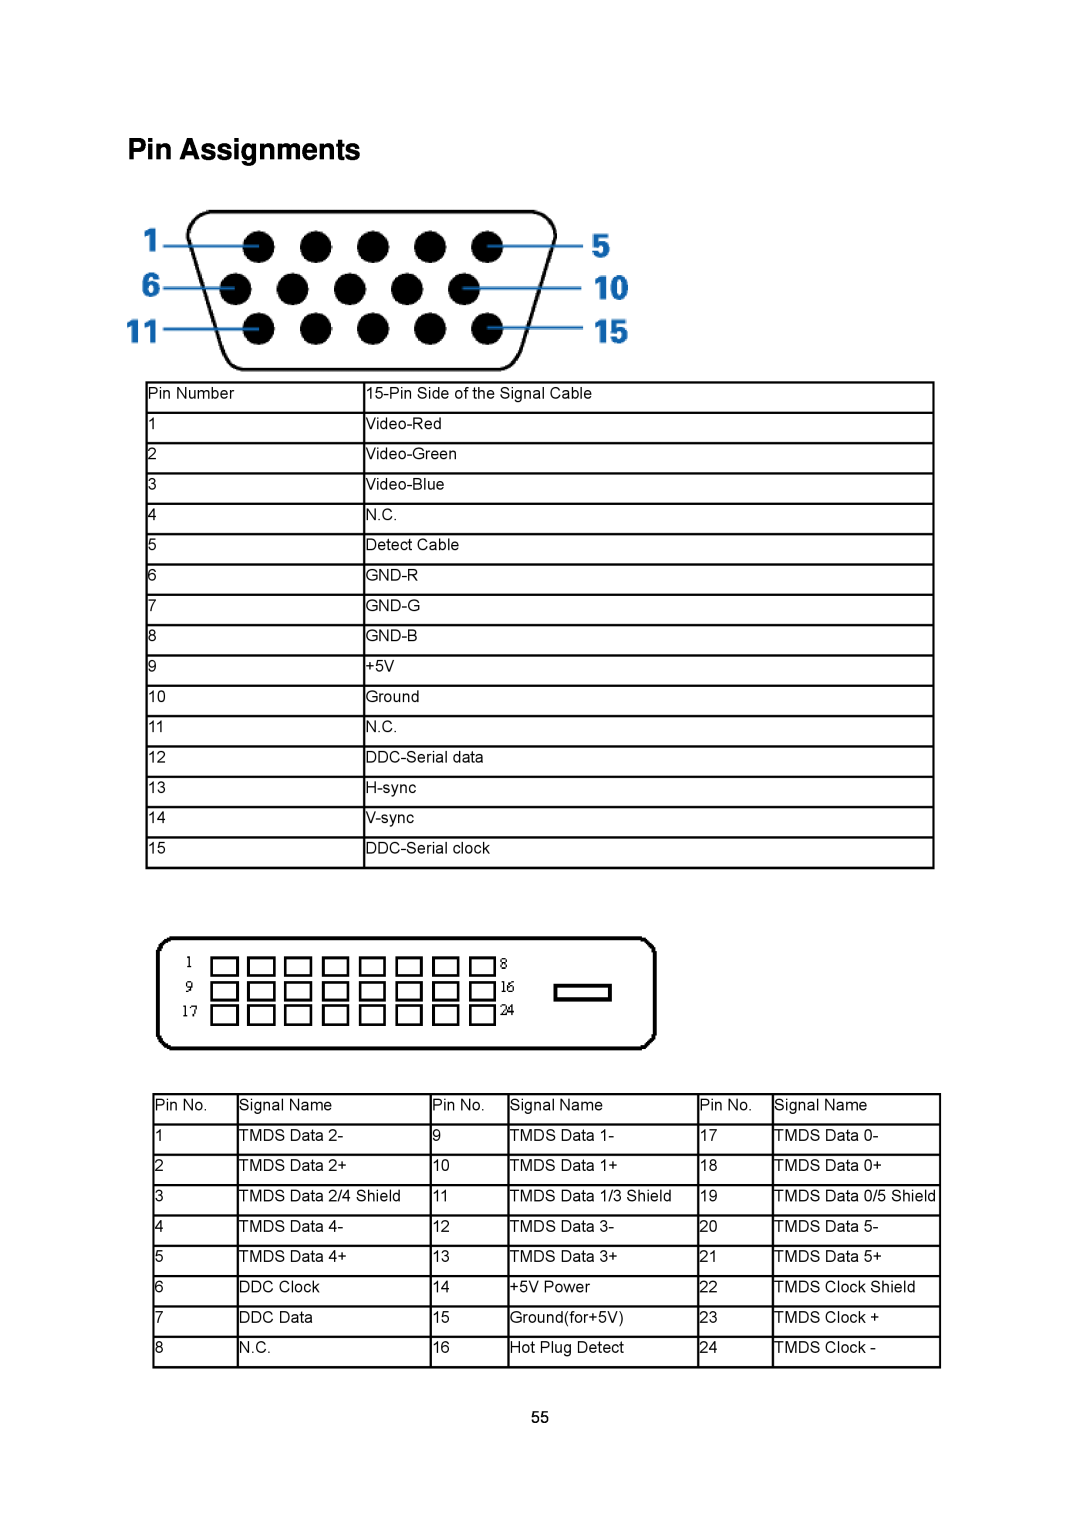 AOC E2043FK manual Pin Assignments, Pin Side of the Signal Cable, TMDS Data 0/5 Shield 